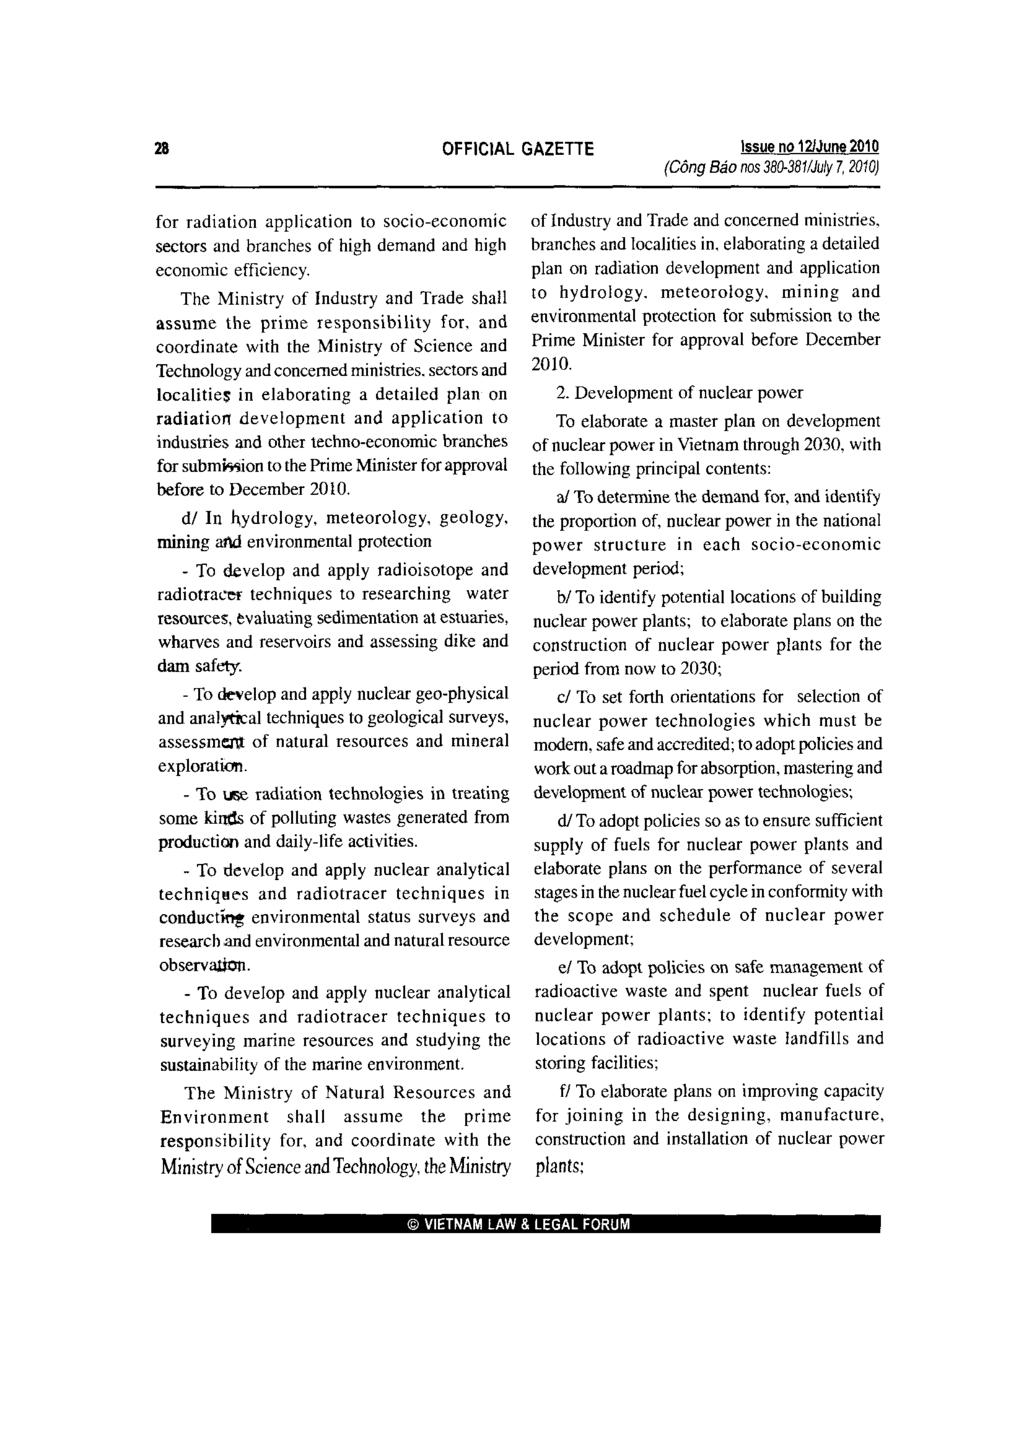 28 OFFICIAL GAZETTE Issue no121june 2010 (G6ng Baanos 38D-381/July 7, 2010) for radiation application to socio-economic sectors and branches of high demand and high economic efficiency.